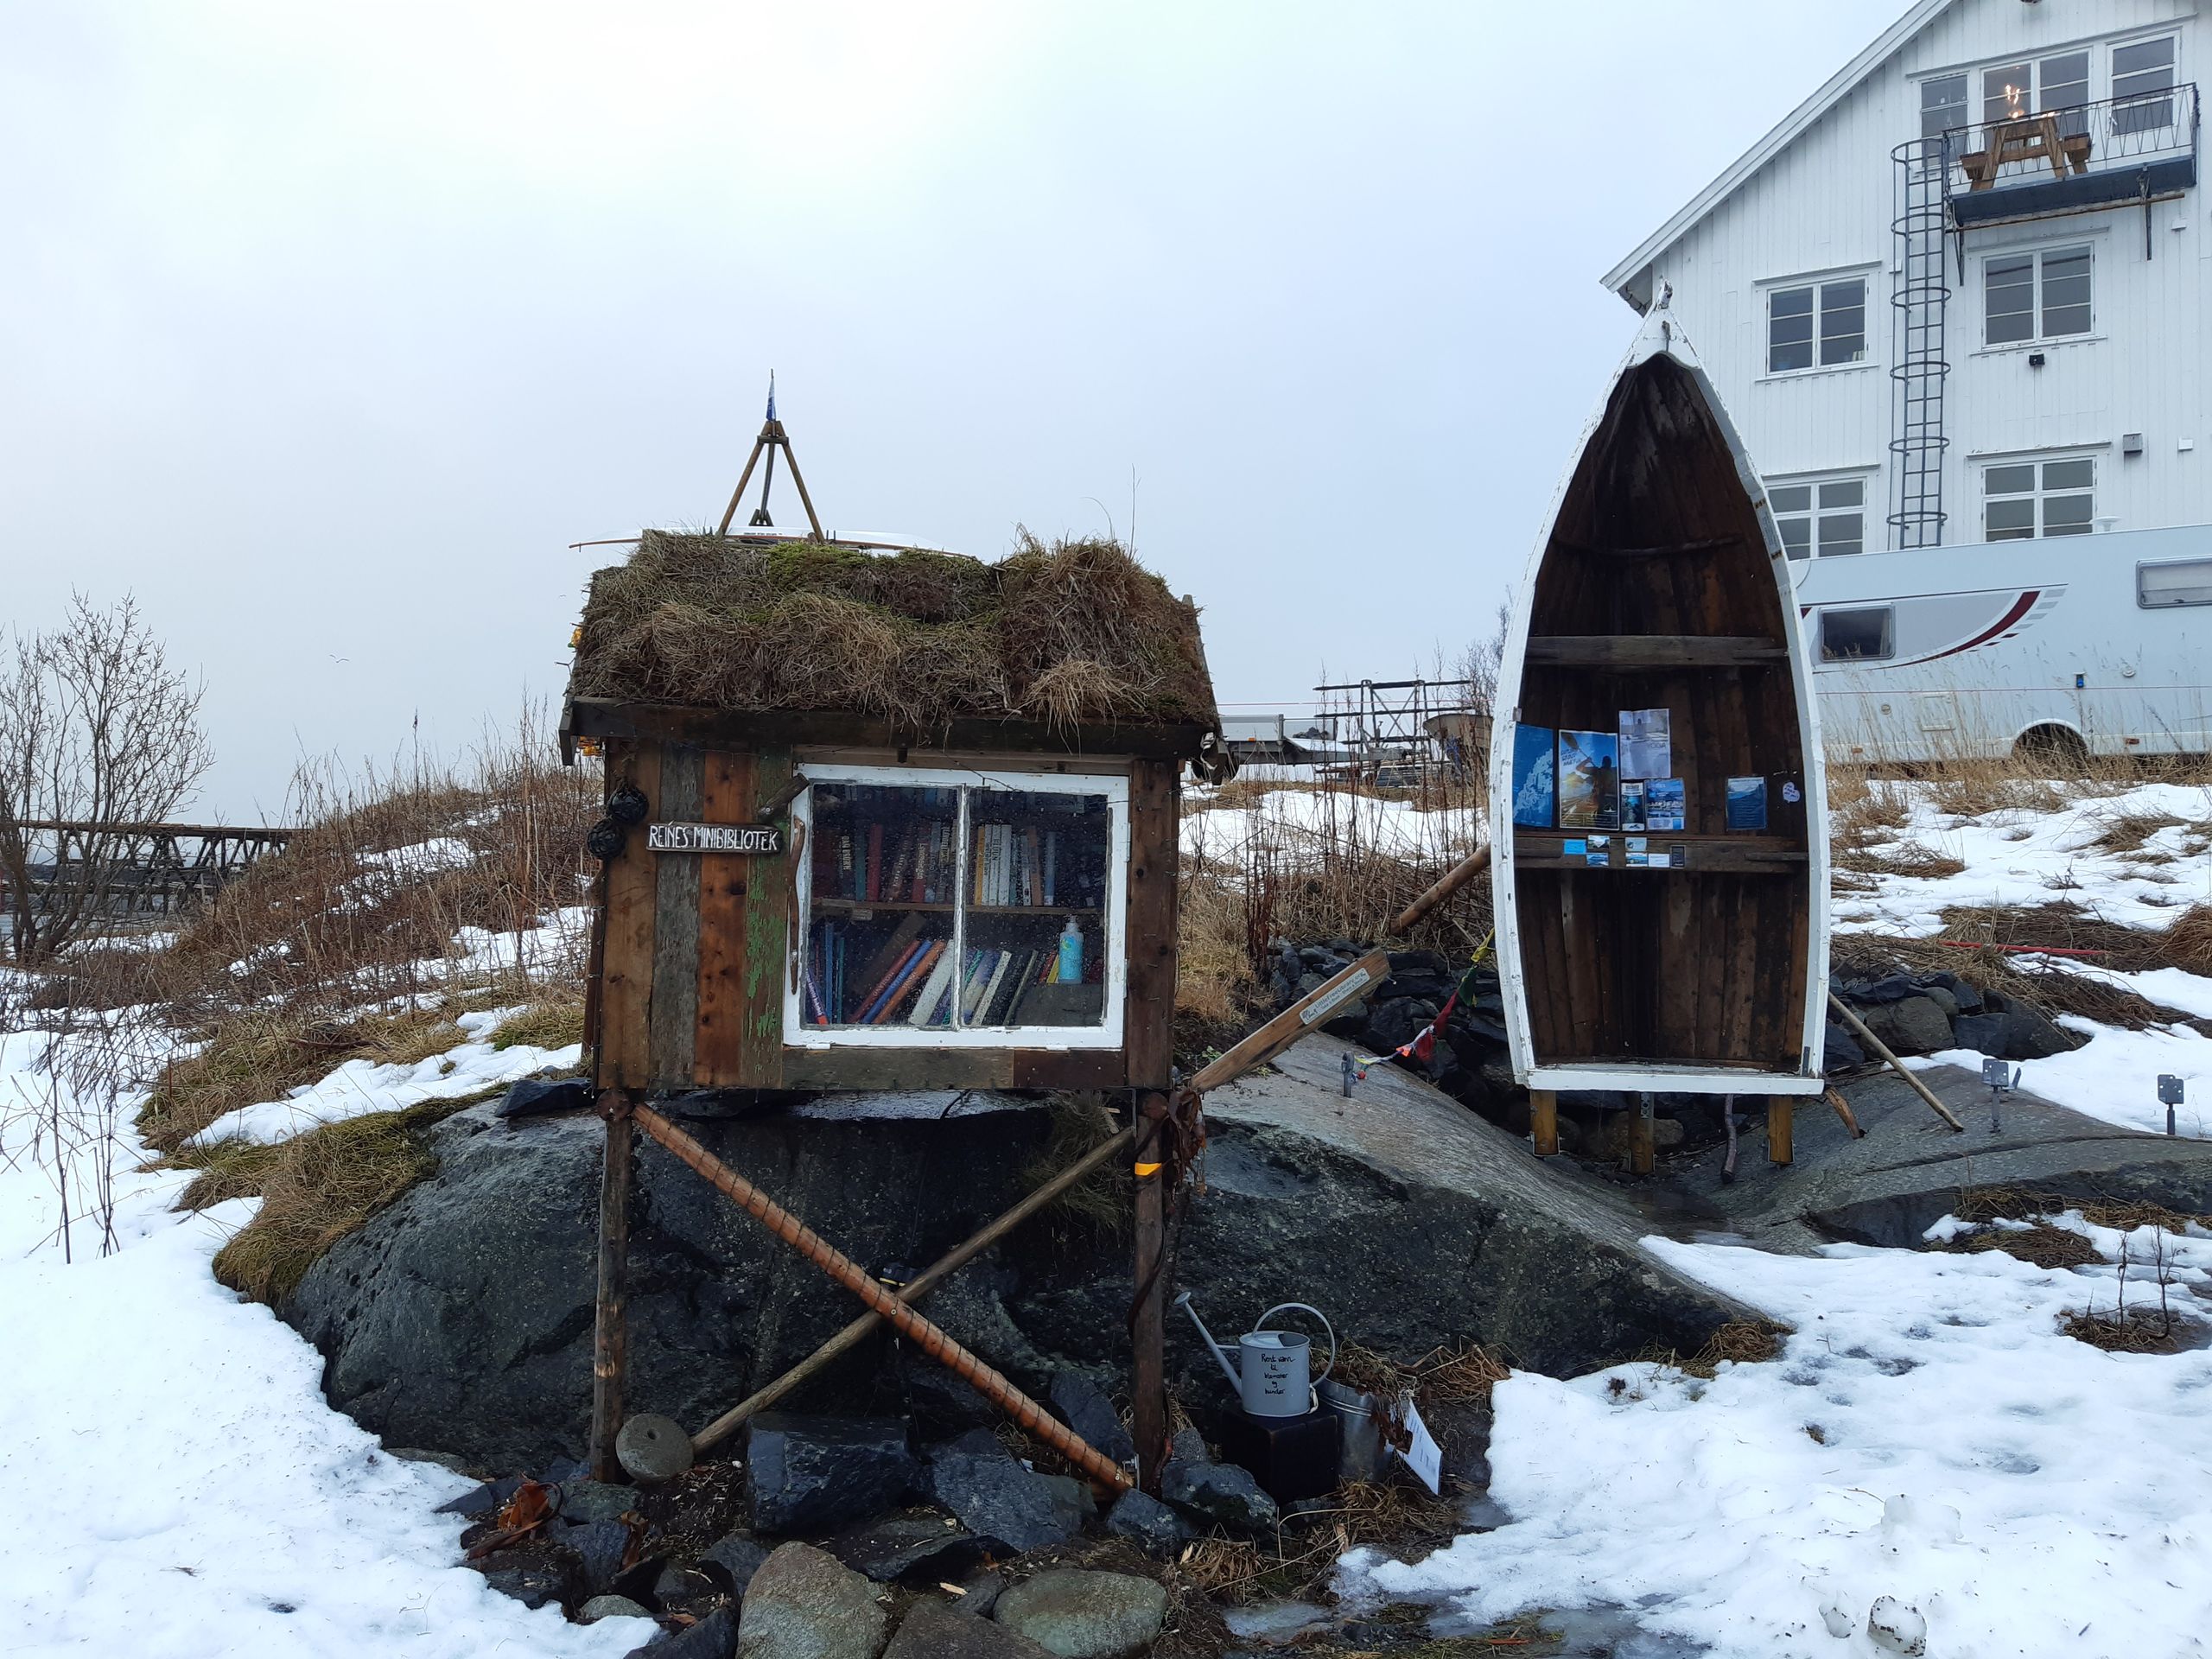 A small swap library in Reine